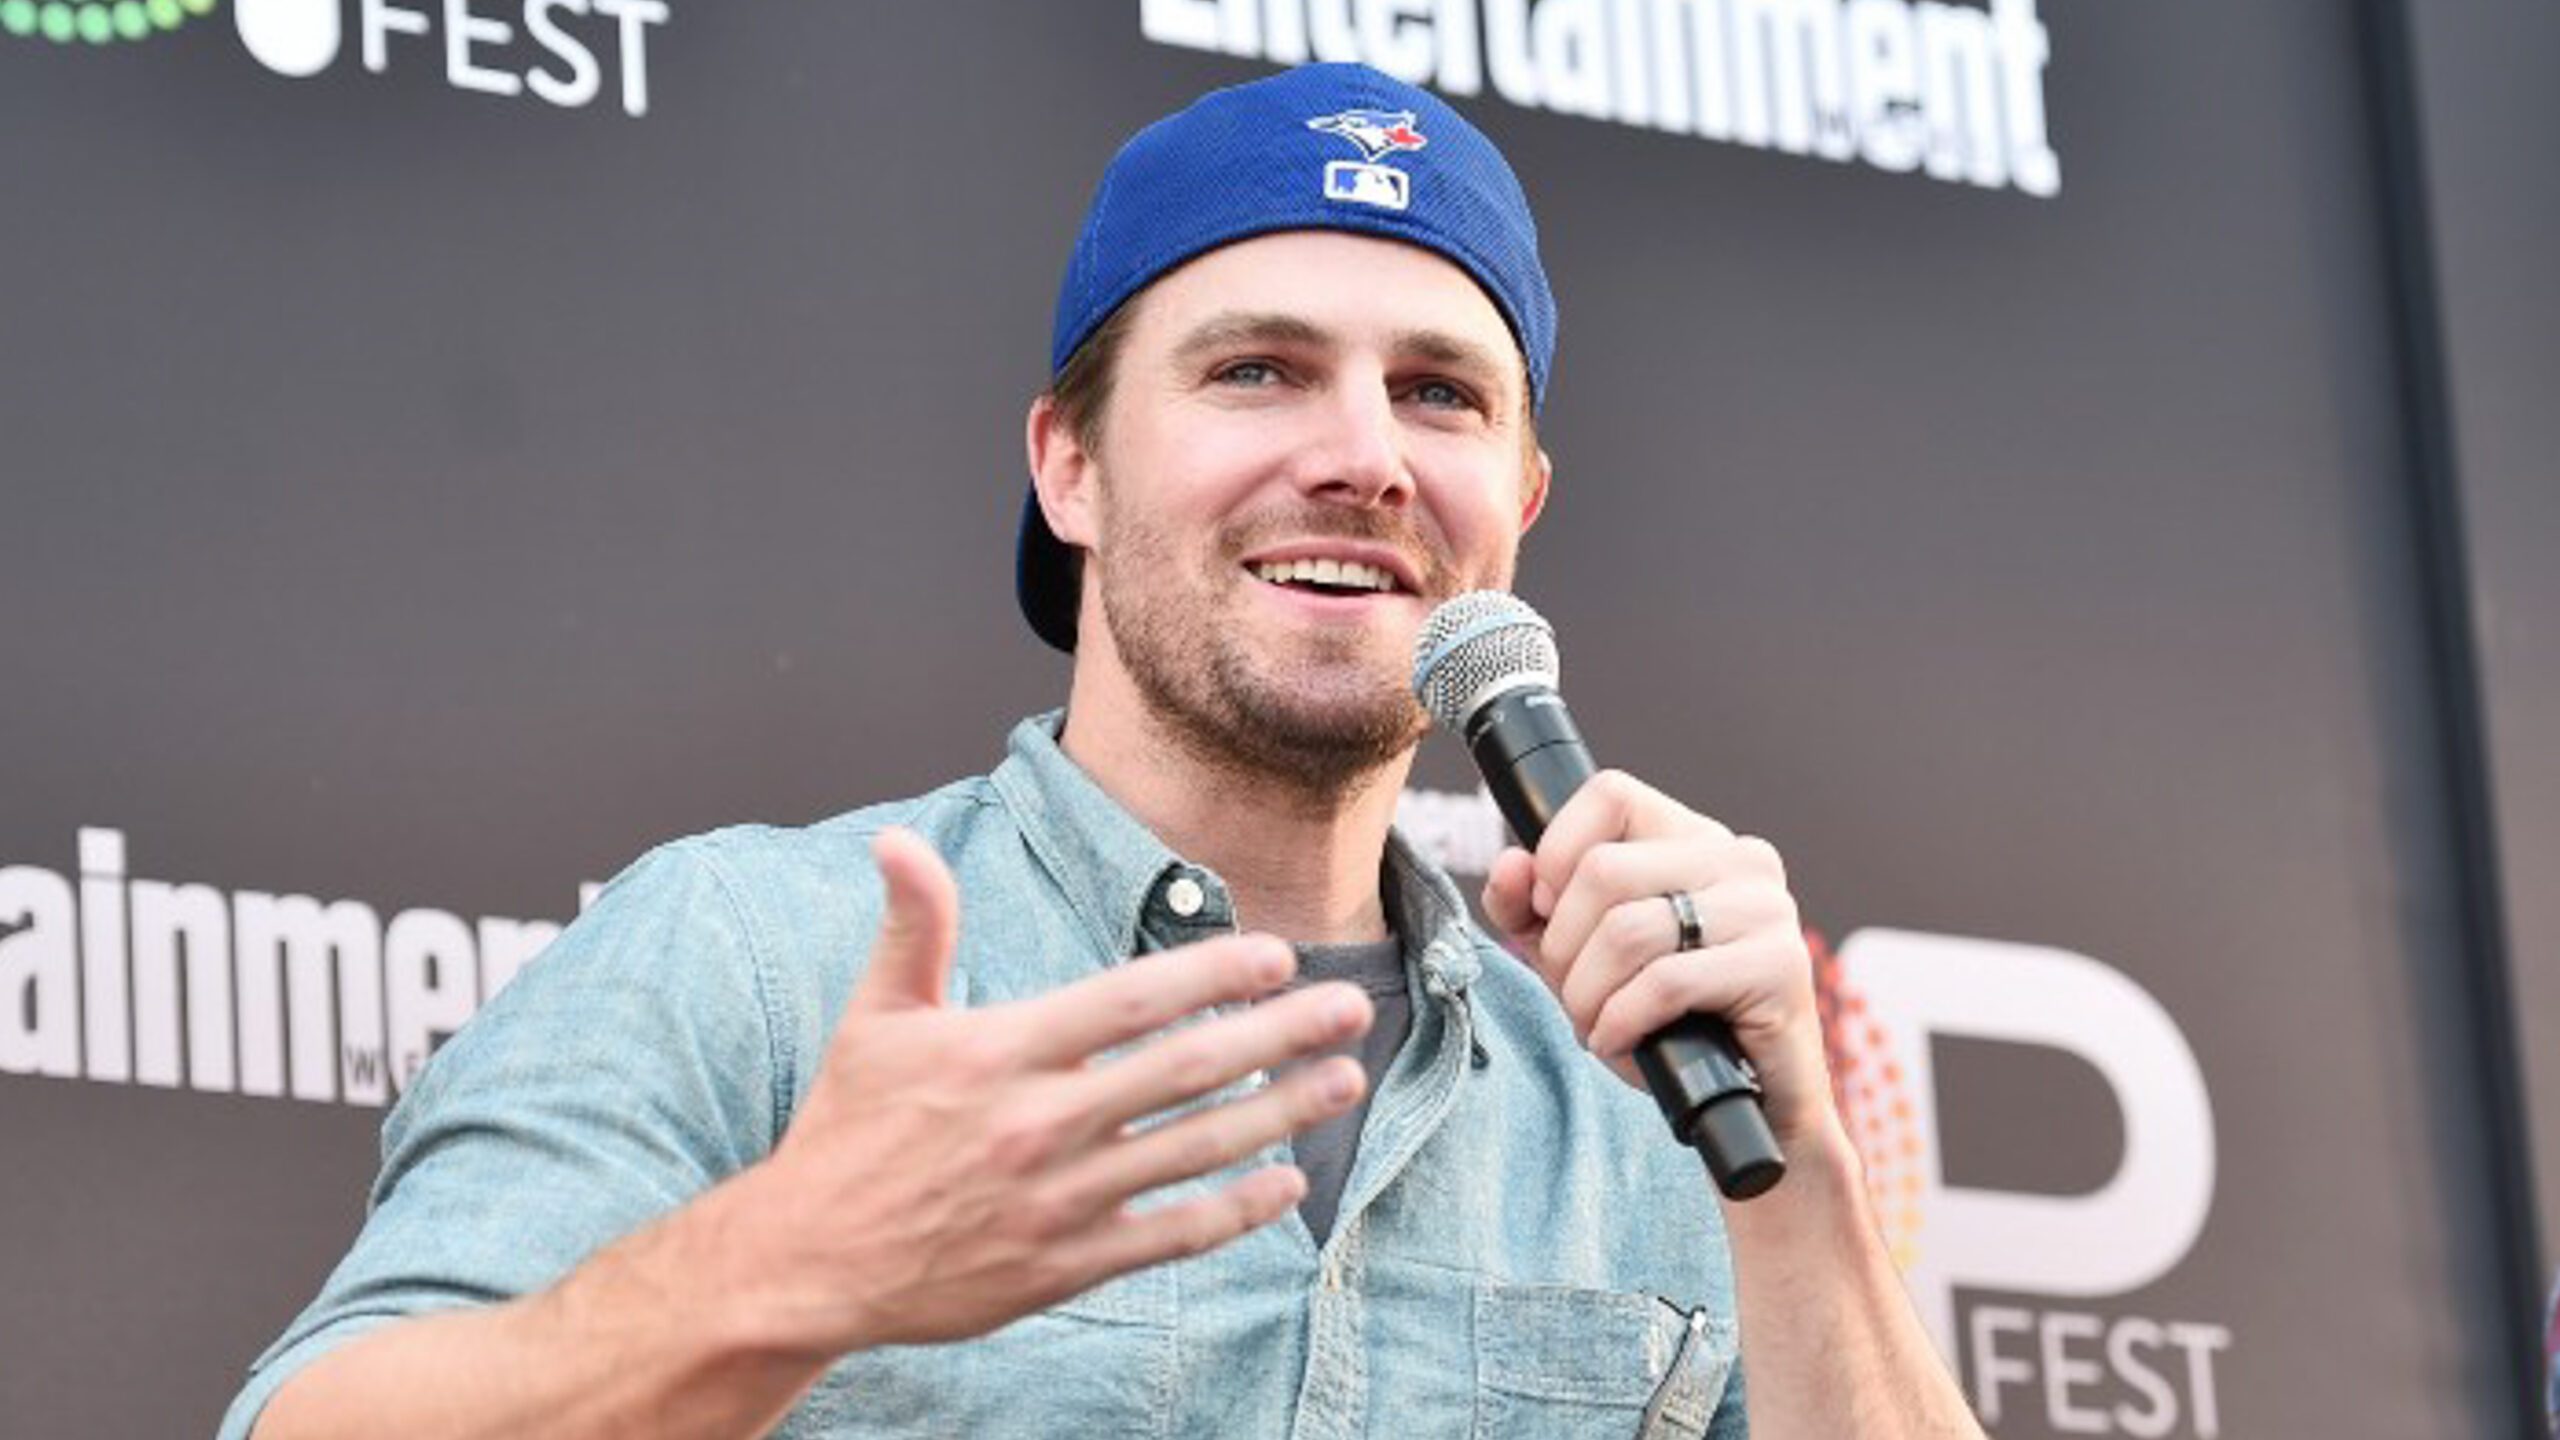 Stephen Amell to compete in ‘American Ninja Warrior’